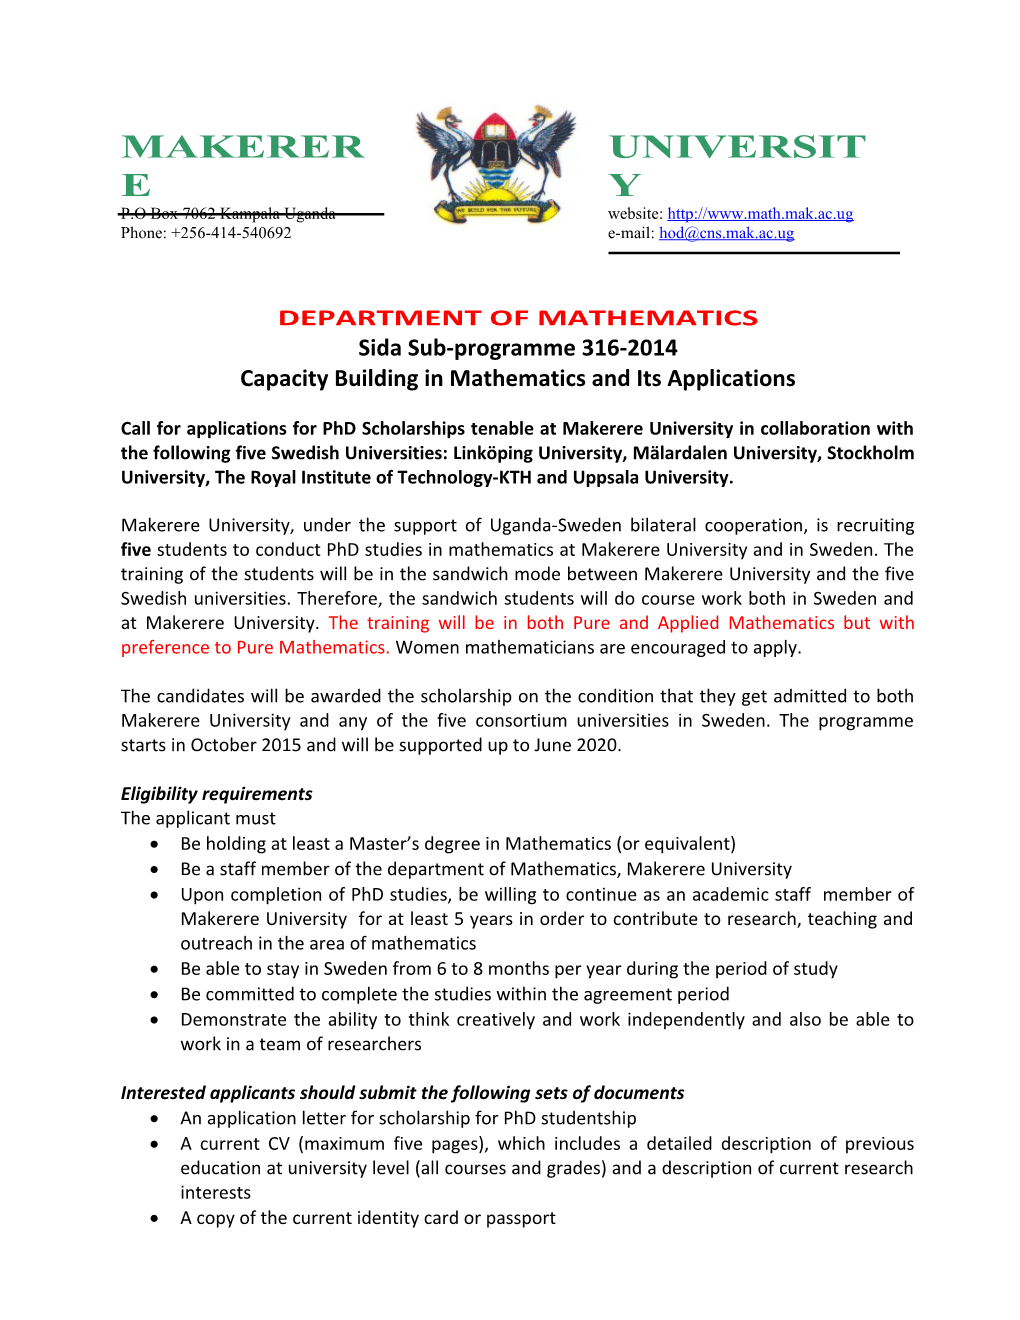 Capacity Building in Mathematics and Its Applications